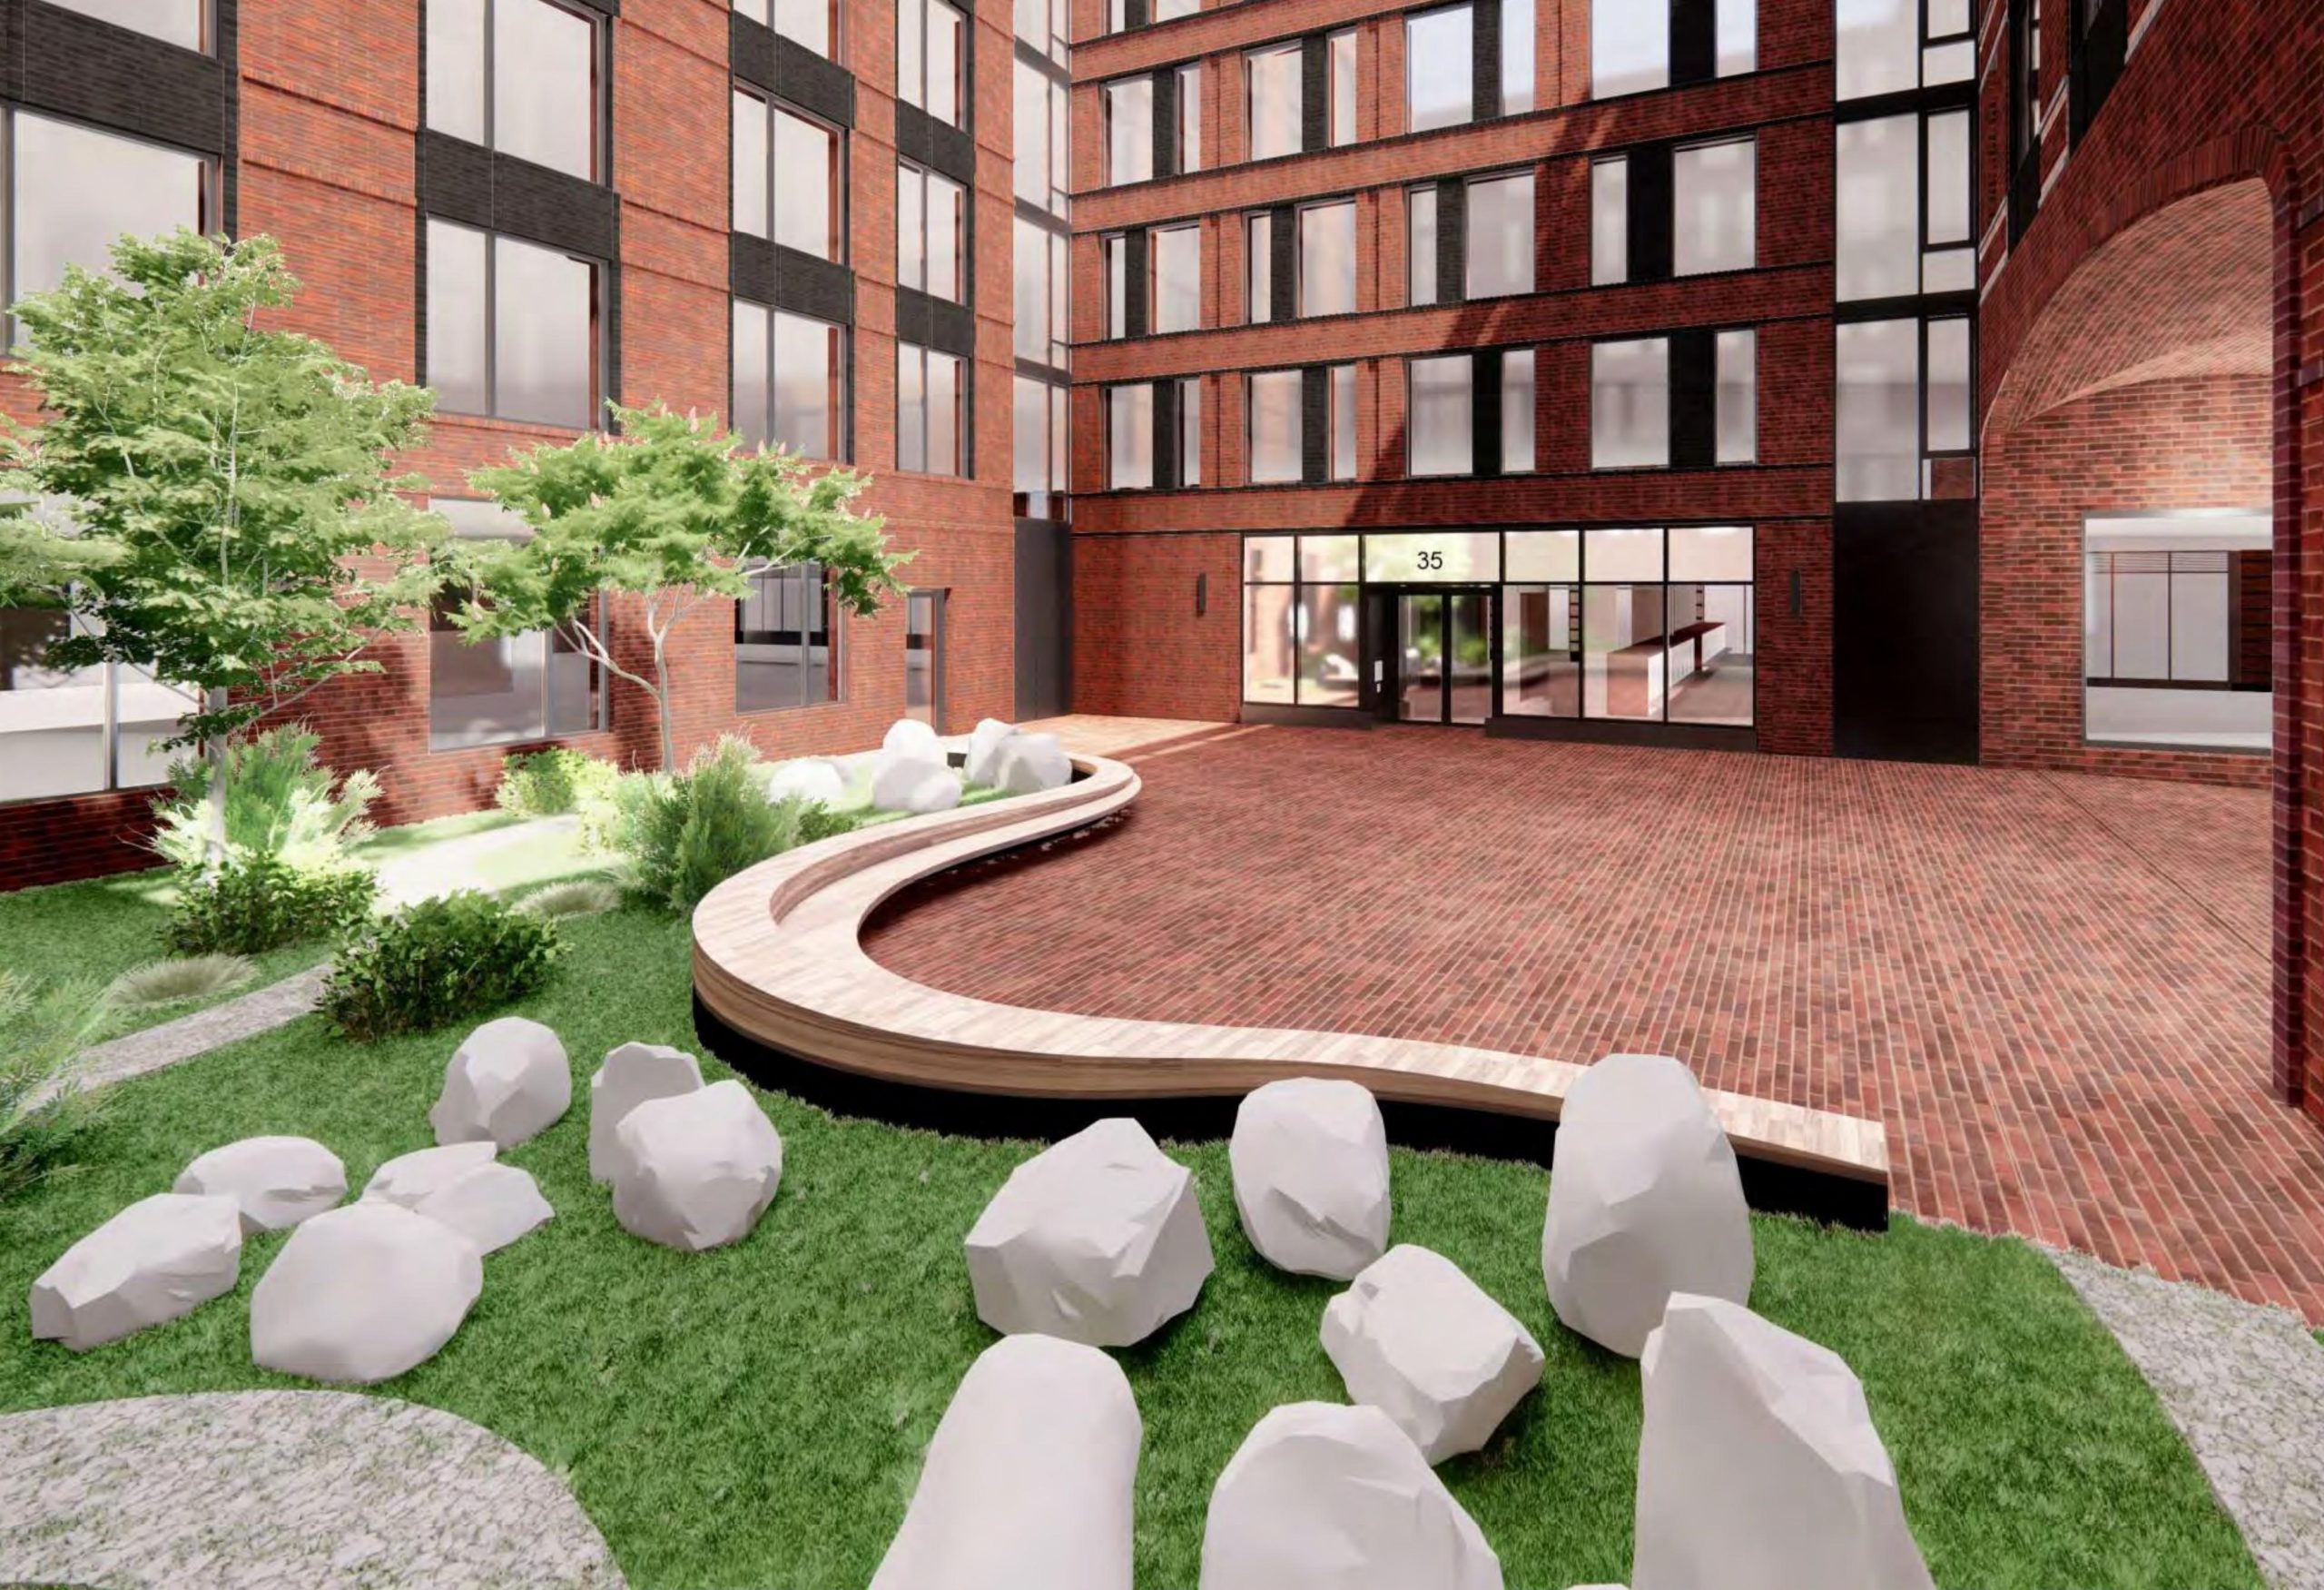 Rendering of the courtyard at 35 Commercial Street in Greenpoint, Brooklyn - Courtesy of Handel Architects